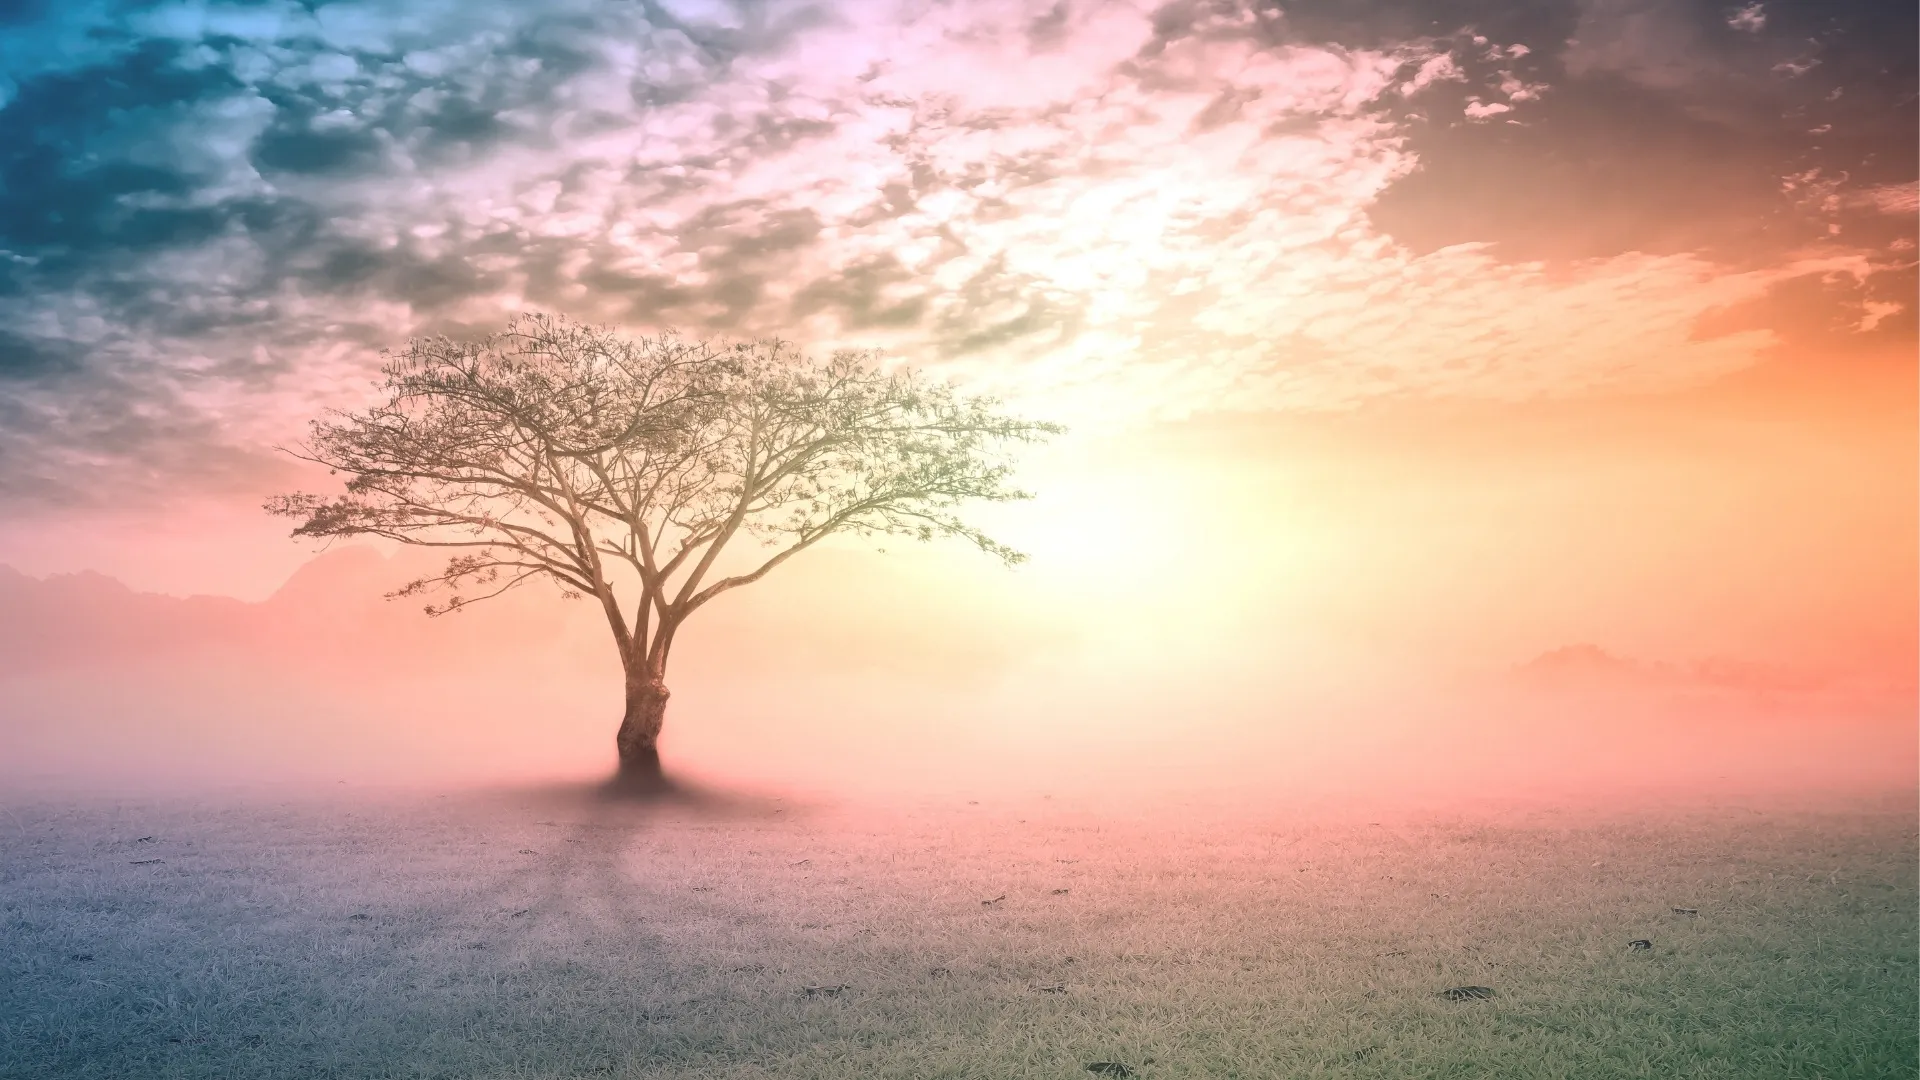 surreal landscape with tree symbolizing holistic healing as a part of nature